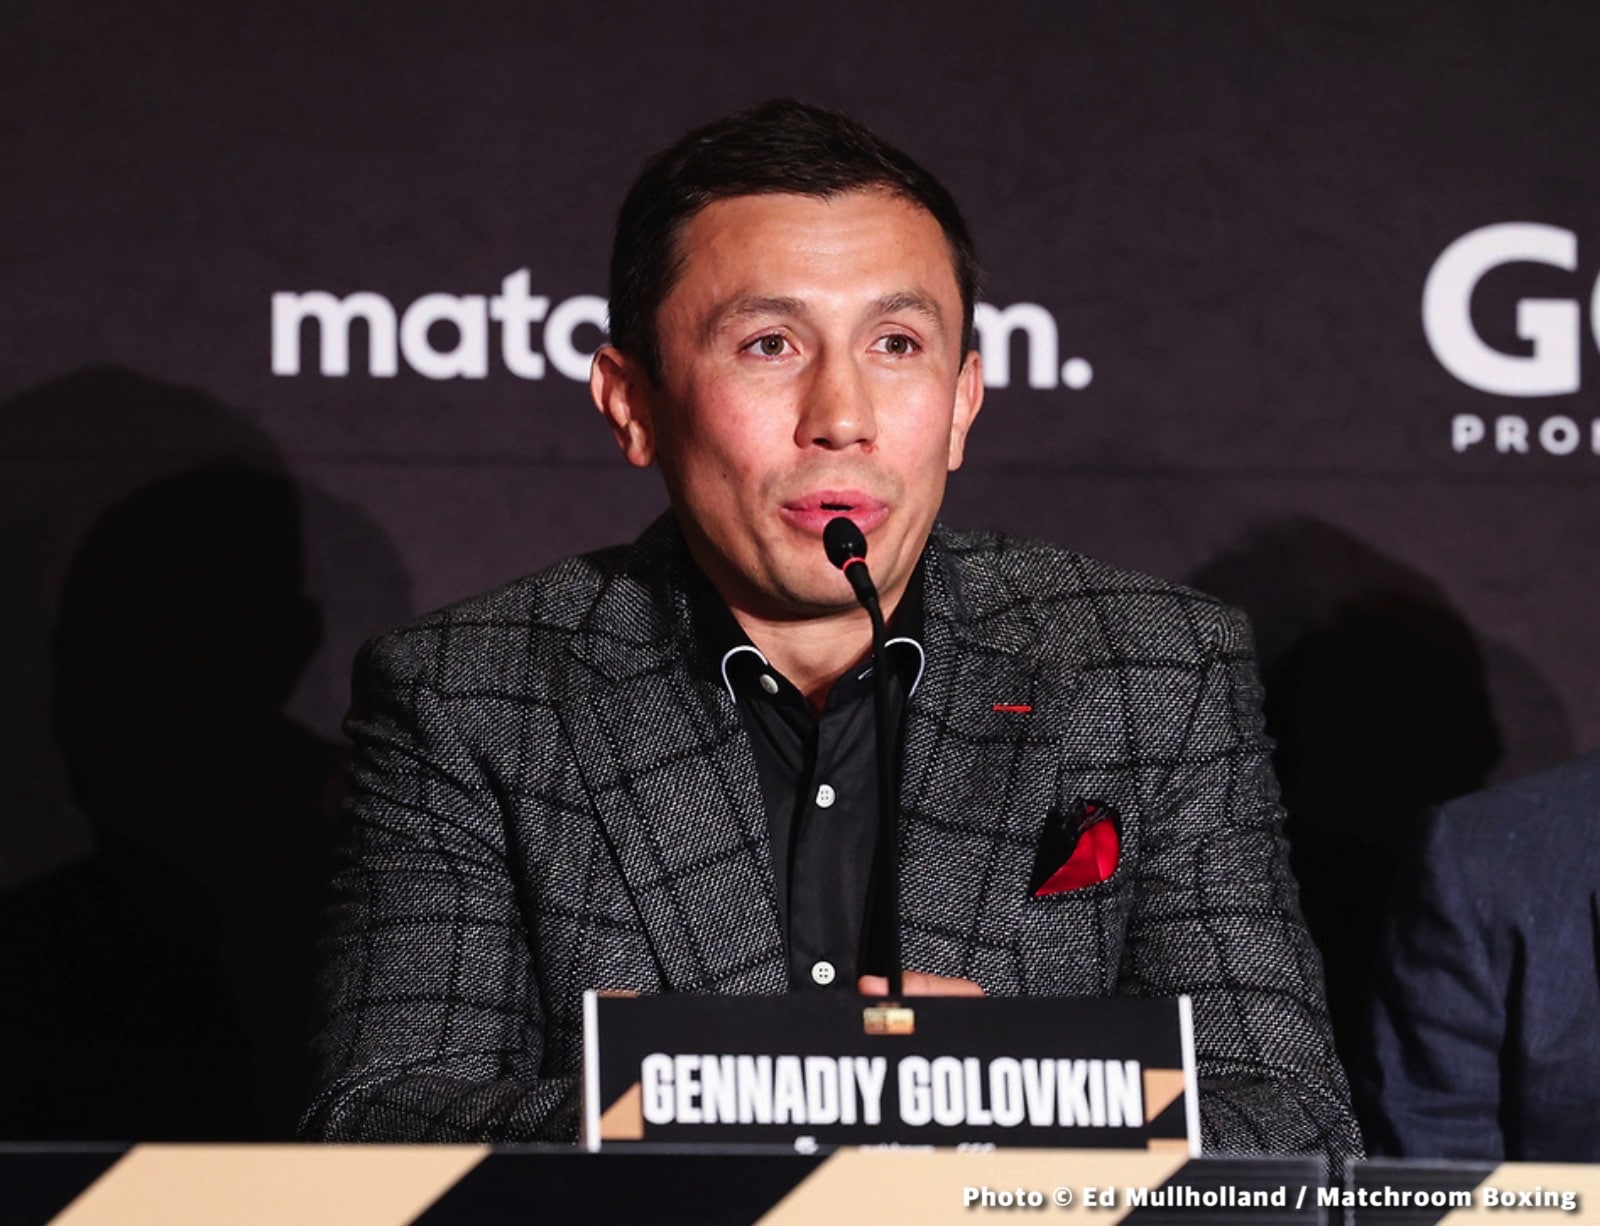 Image: Golovkin says Canelo "will help me retire from the financial standpoint"